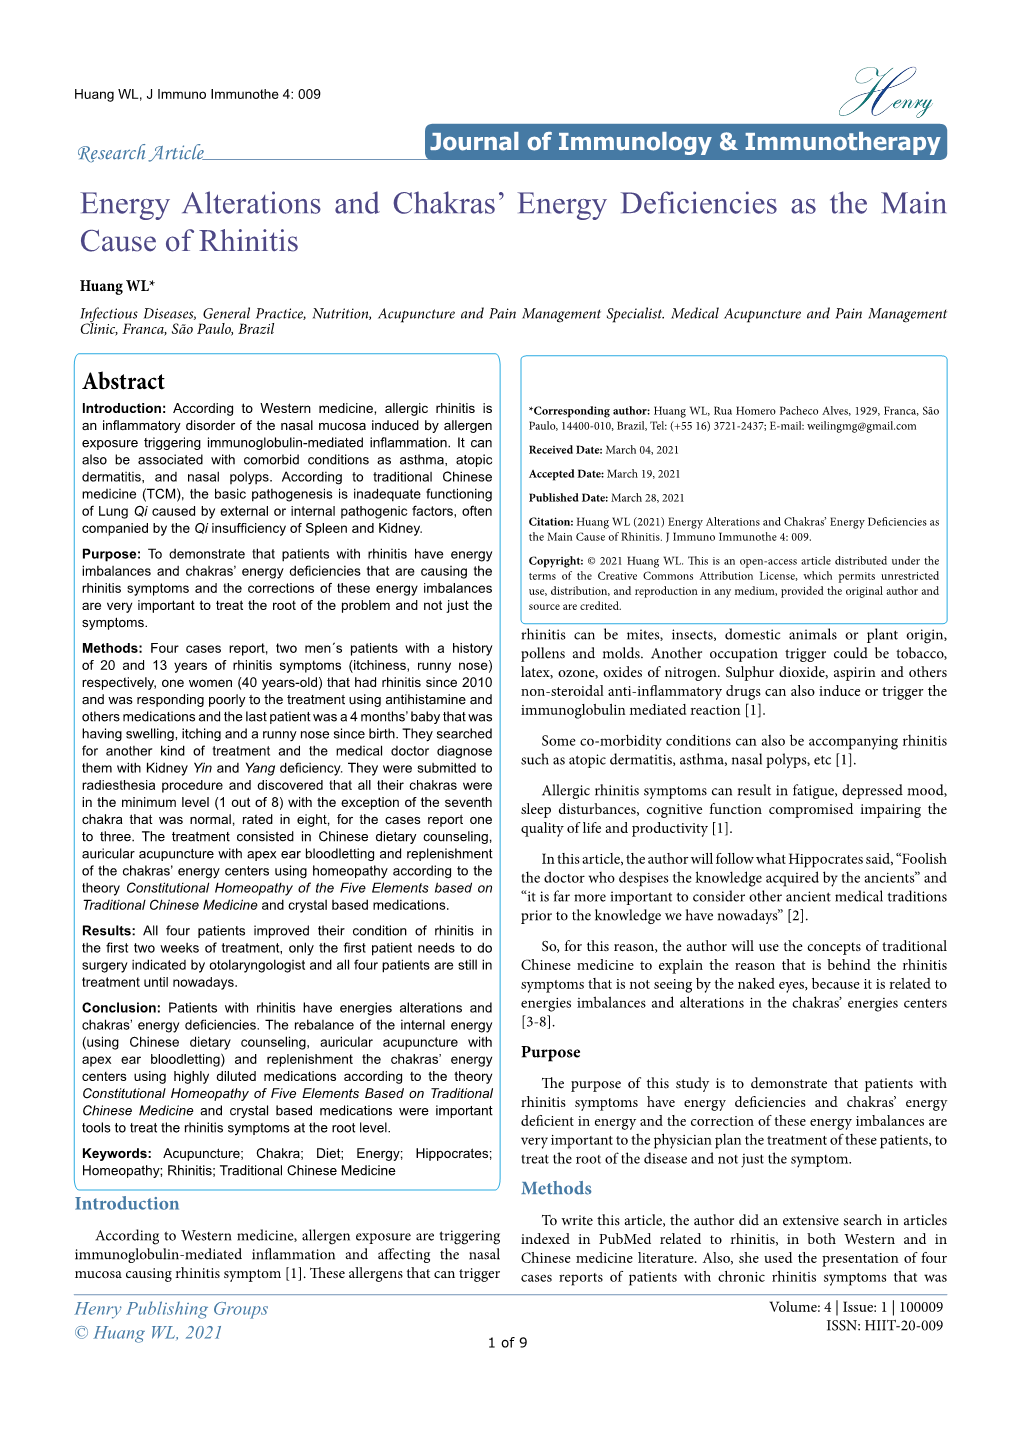 Energy Alterations and Chakras' Energy Deficiencies As the Main Cause of Rhinitis